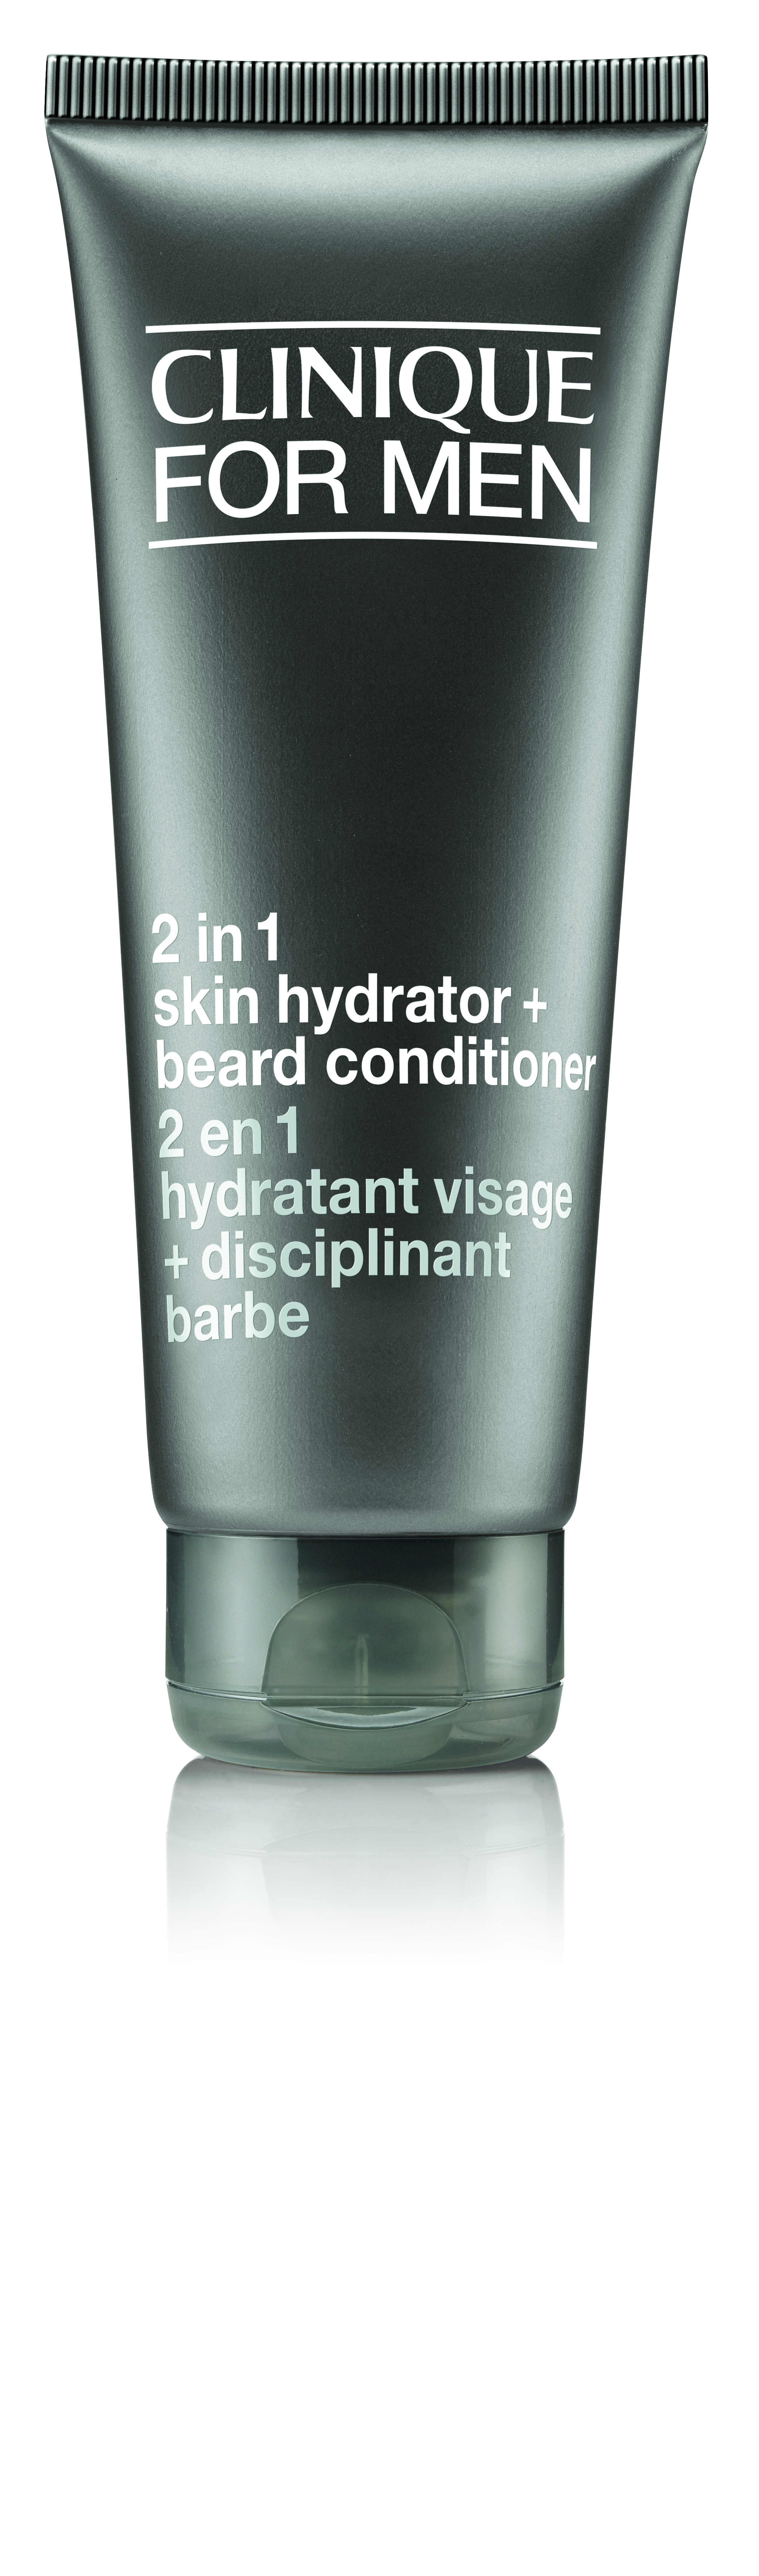 Available worldwide from October, the 2-in-1 Skin Hydrator & Beard Conditioner helps men with beards care for the skin underneath 